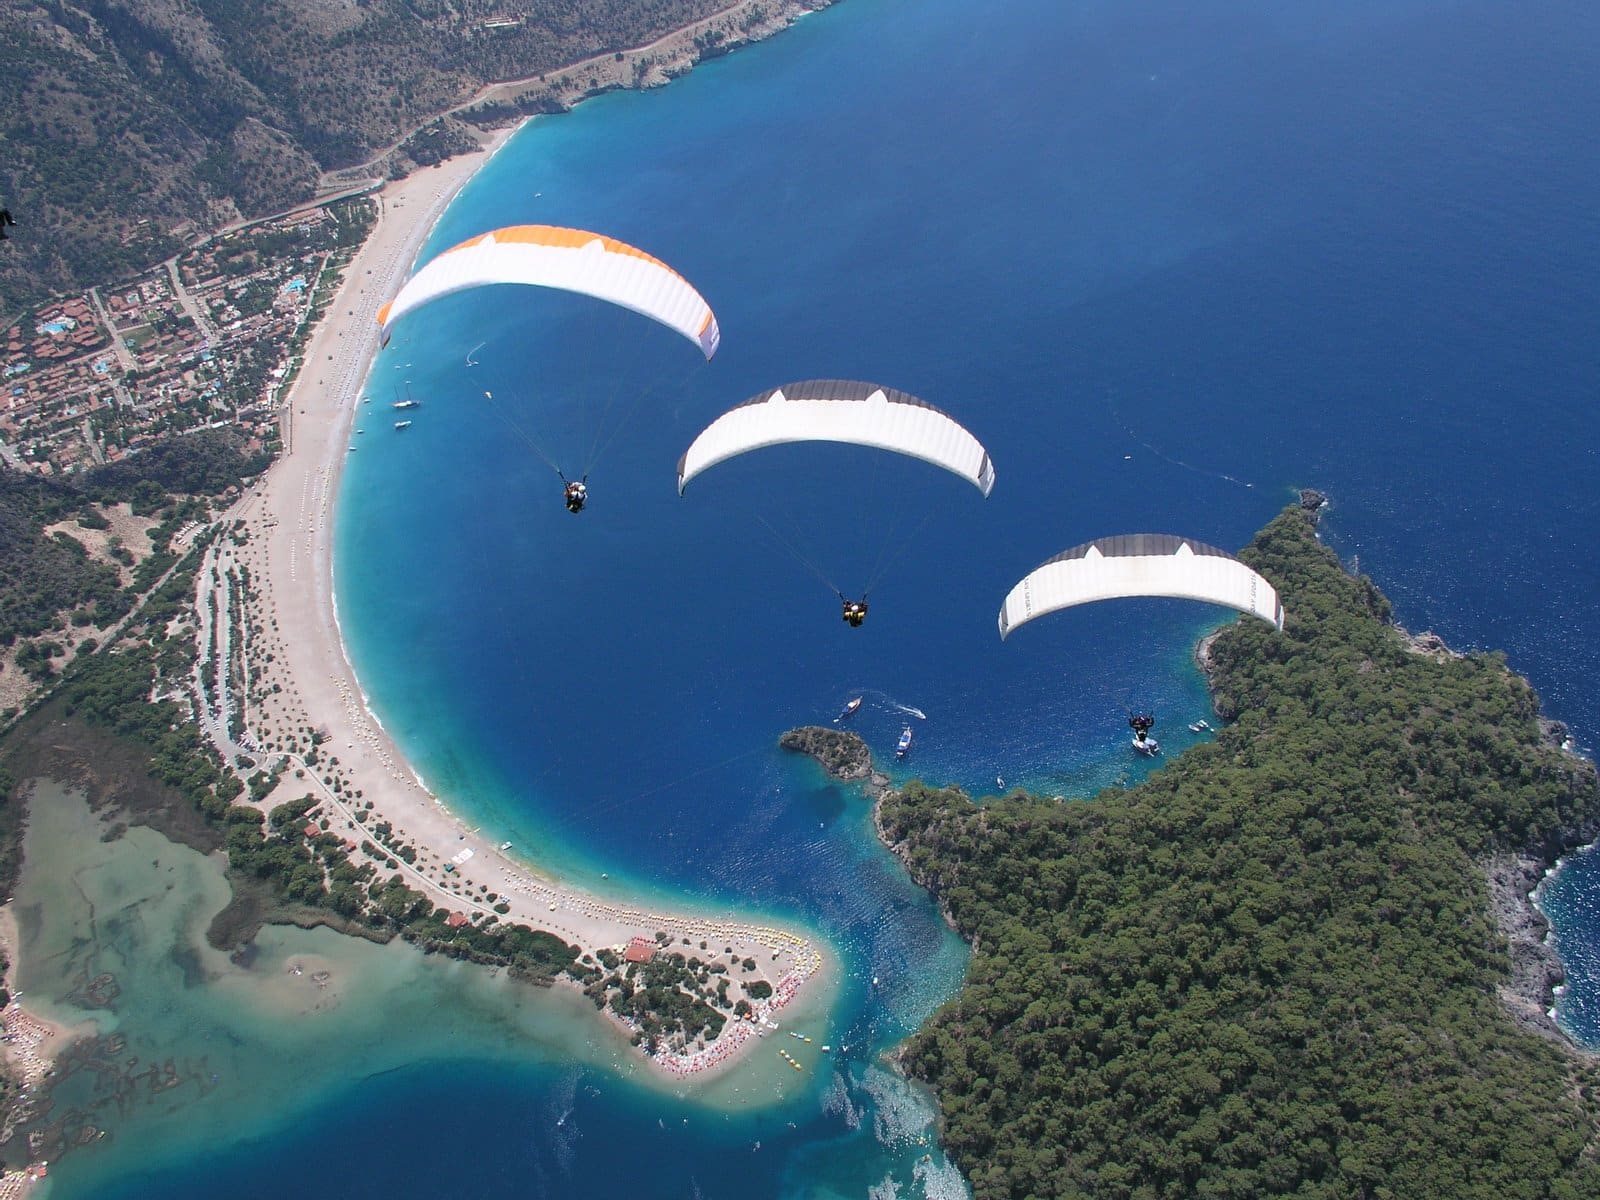 What’s So Special About Oludeniz?